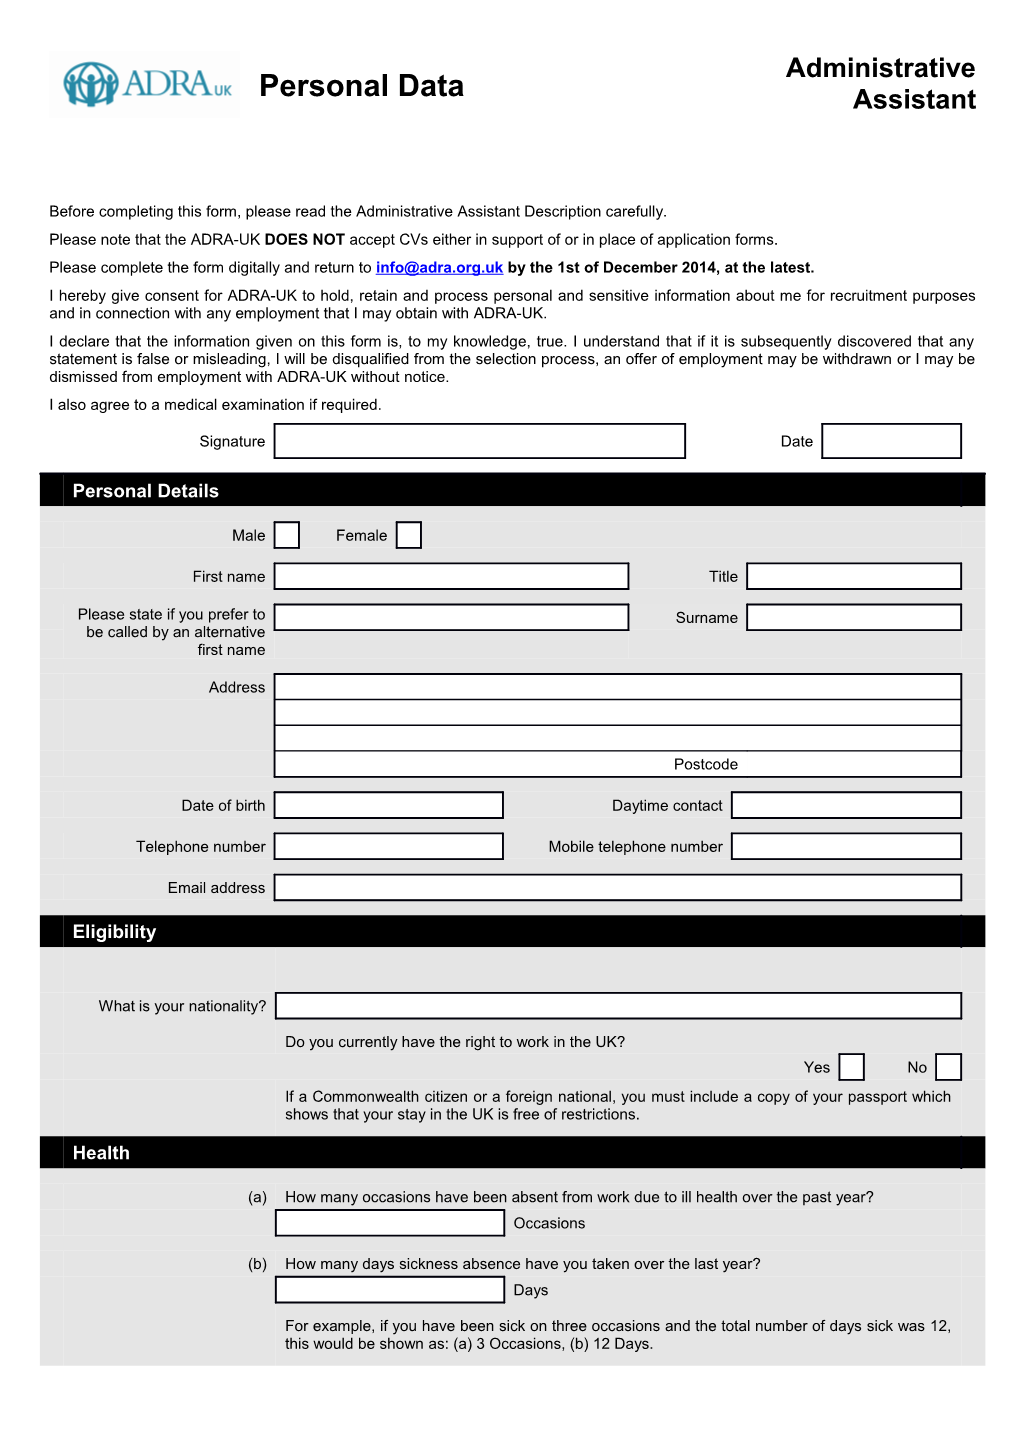 Administrative Assistant 2014 Application Form